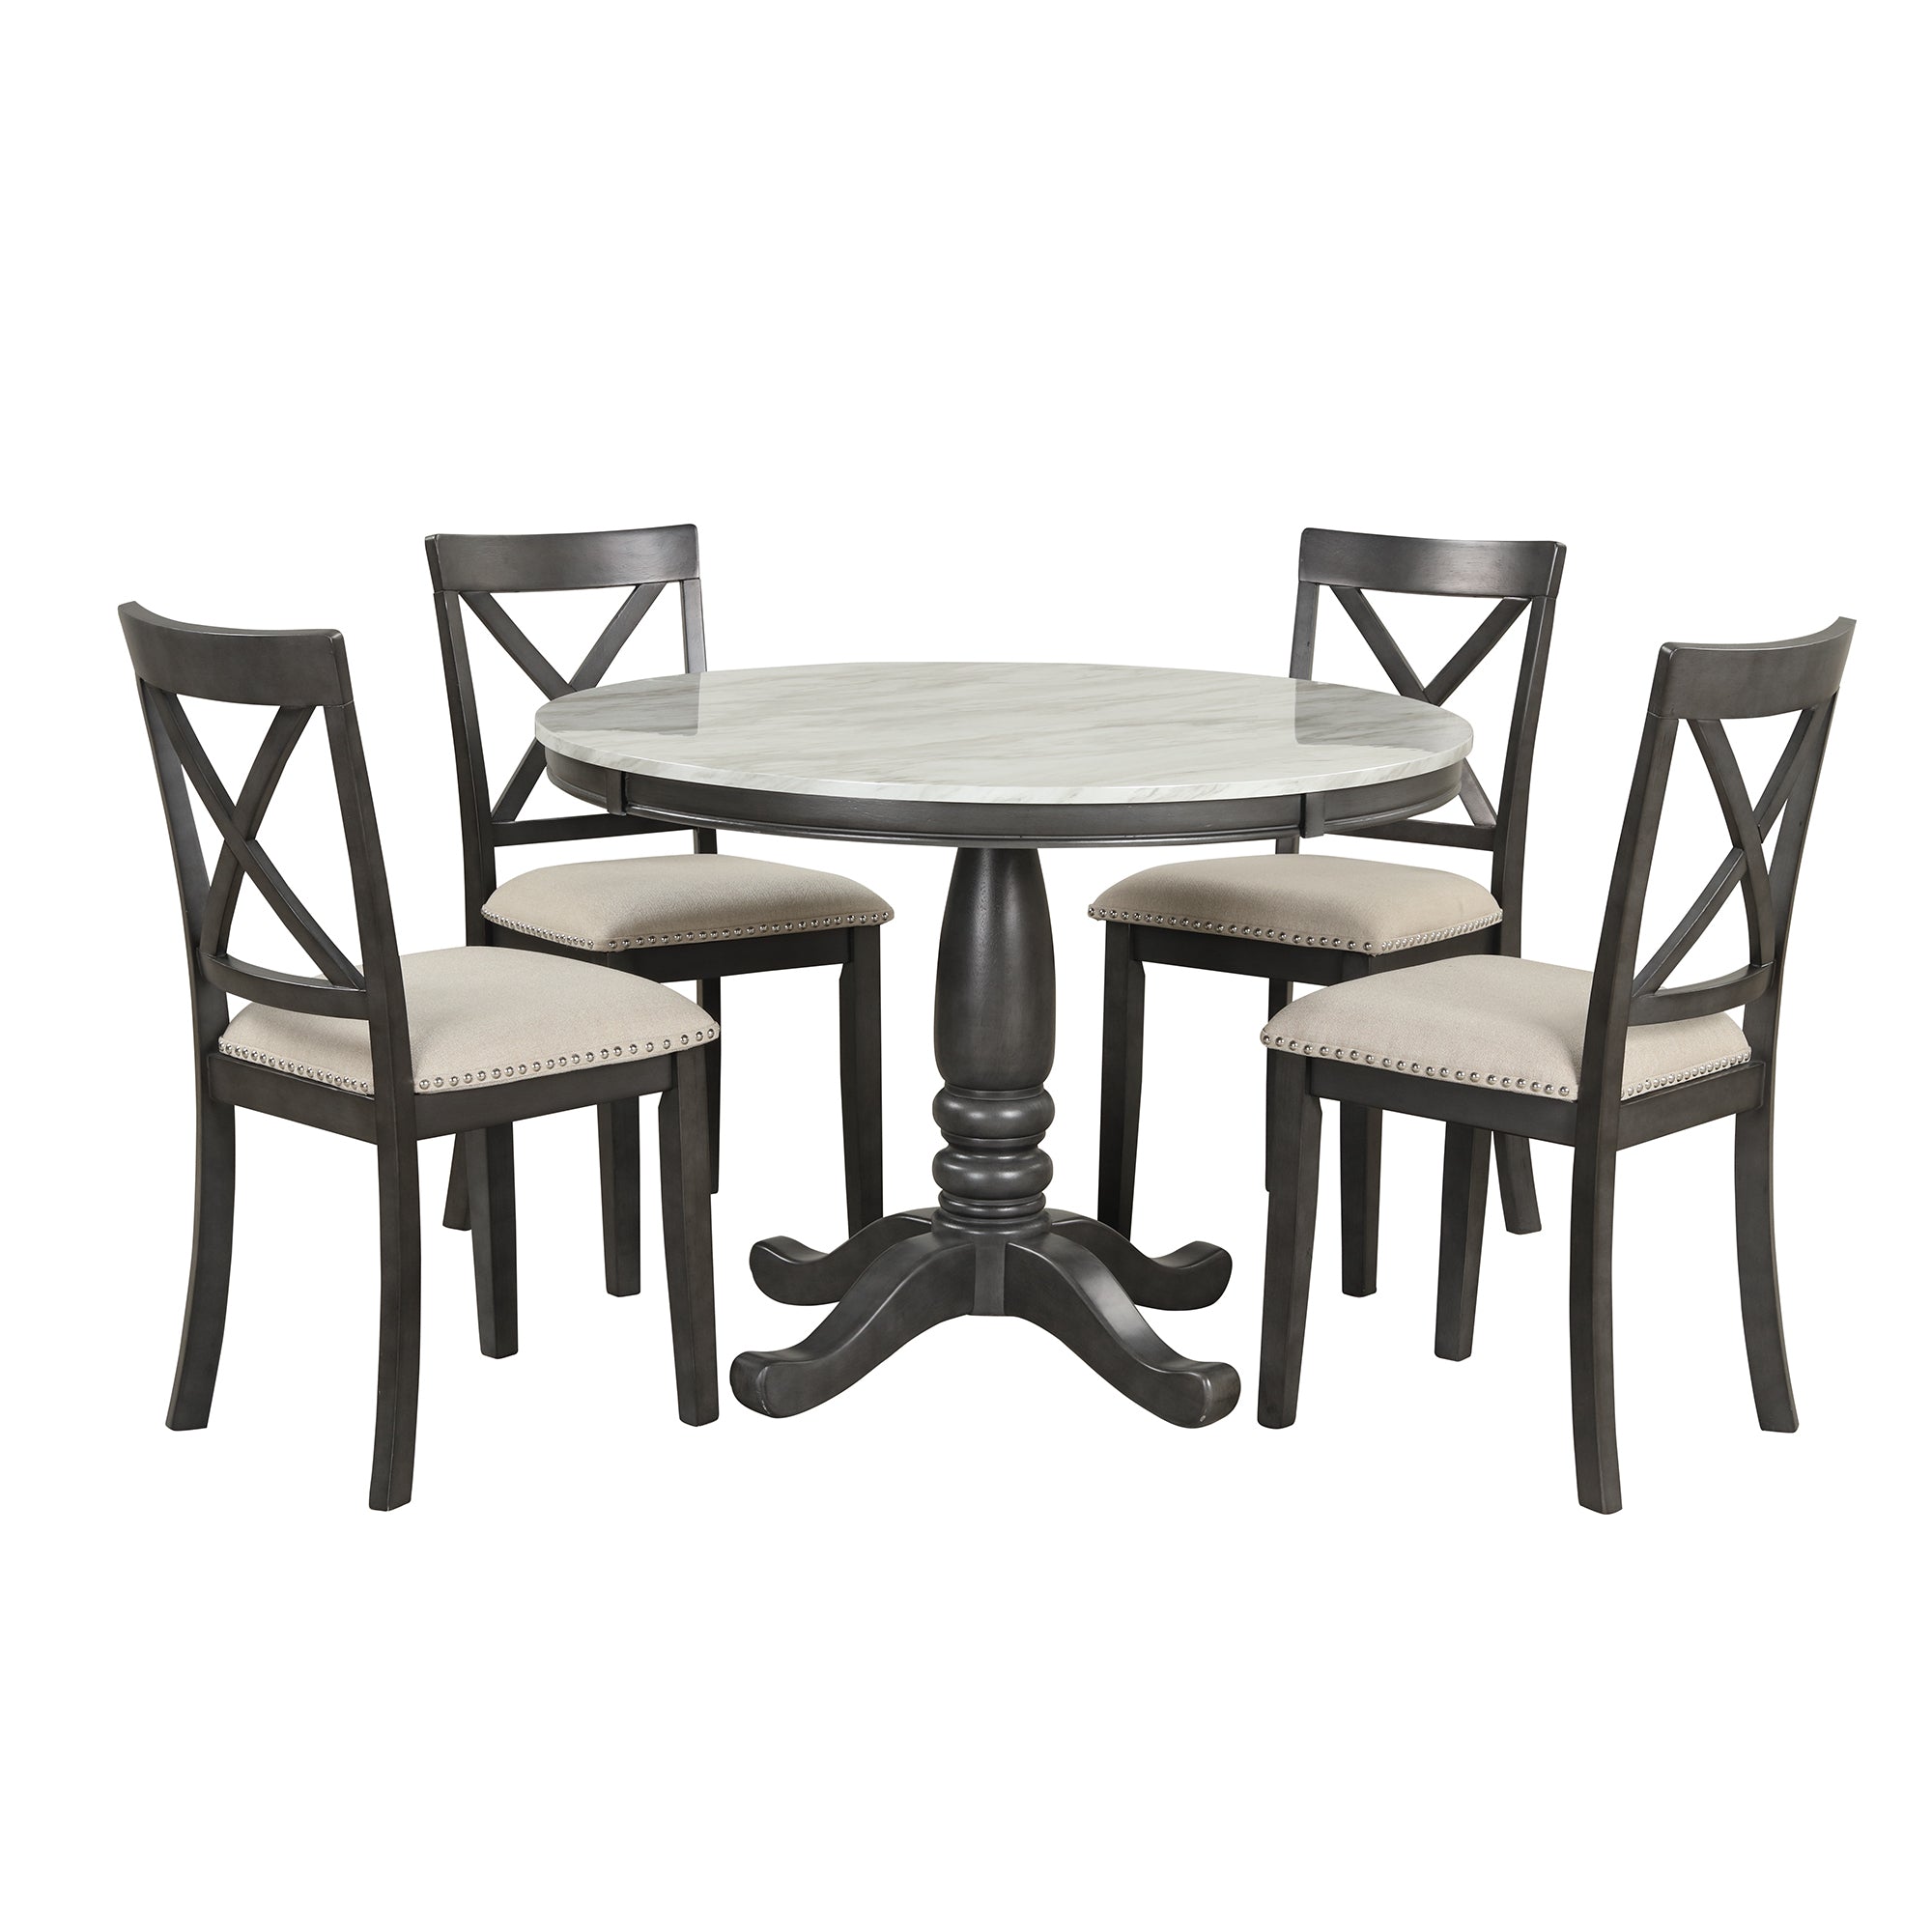 oliver. 5 Sets of 1 Solid Wood Table with 4 Chairs